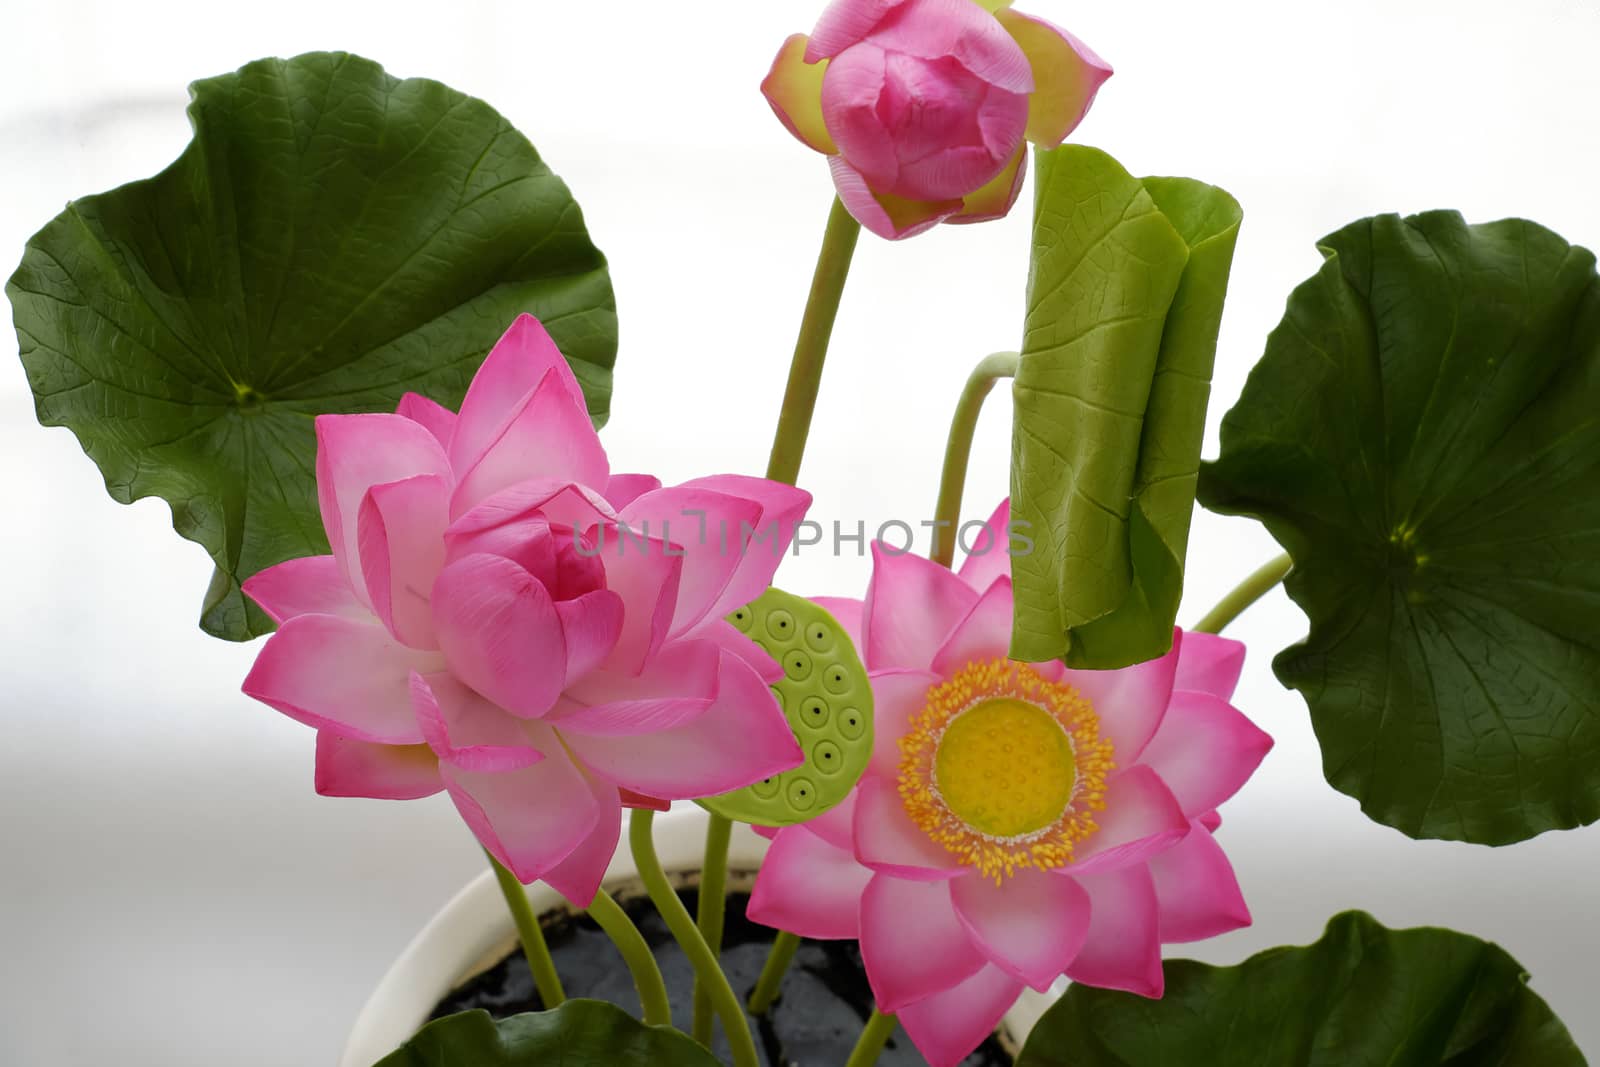 clay lotus flower on white background by xuanhuongho